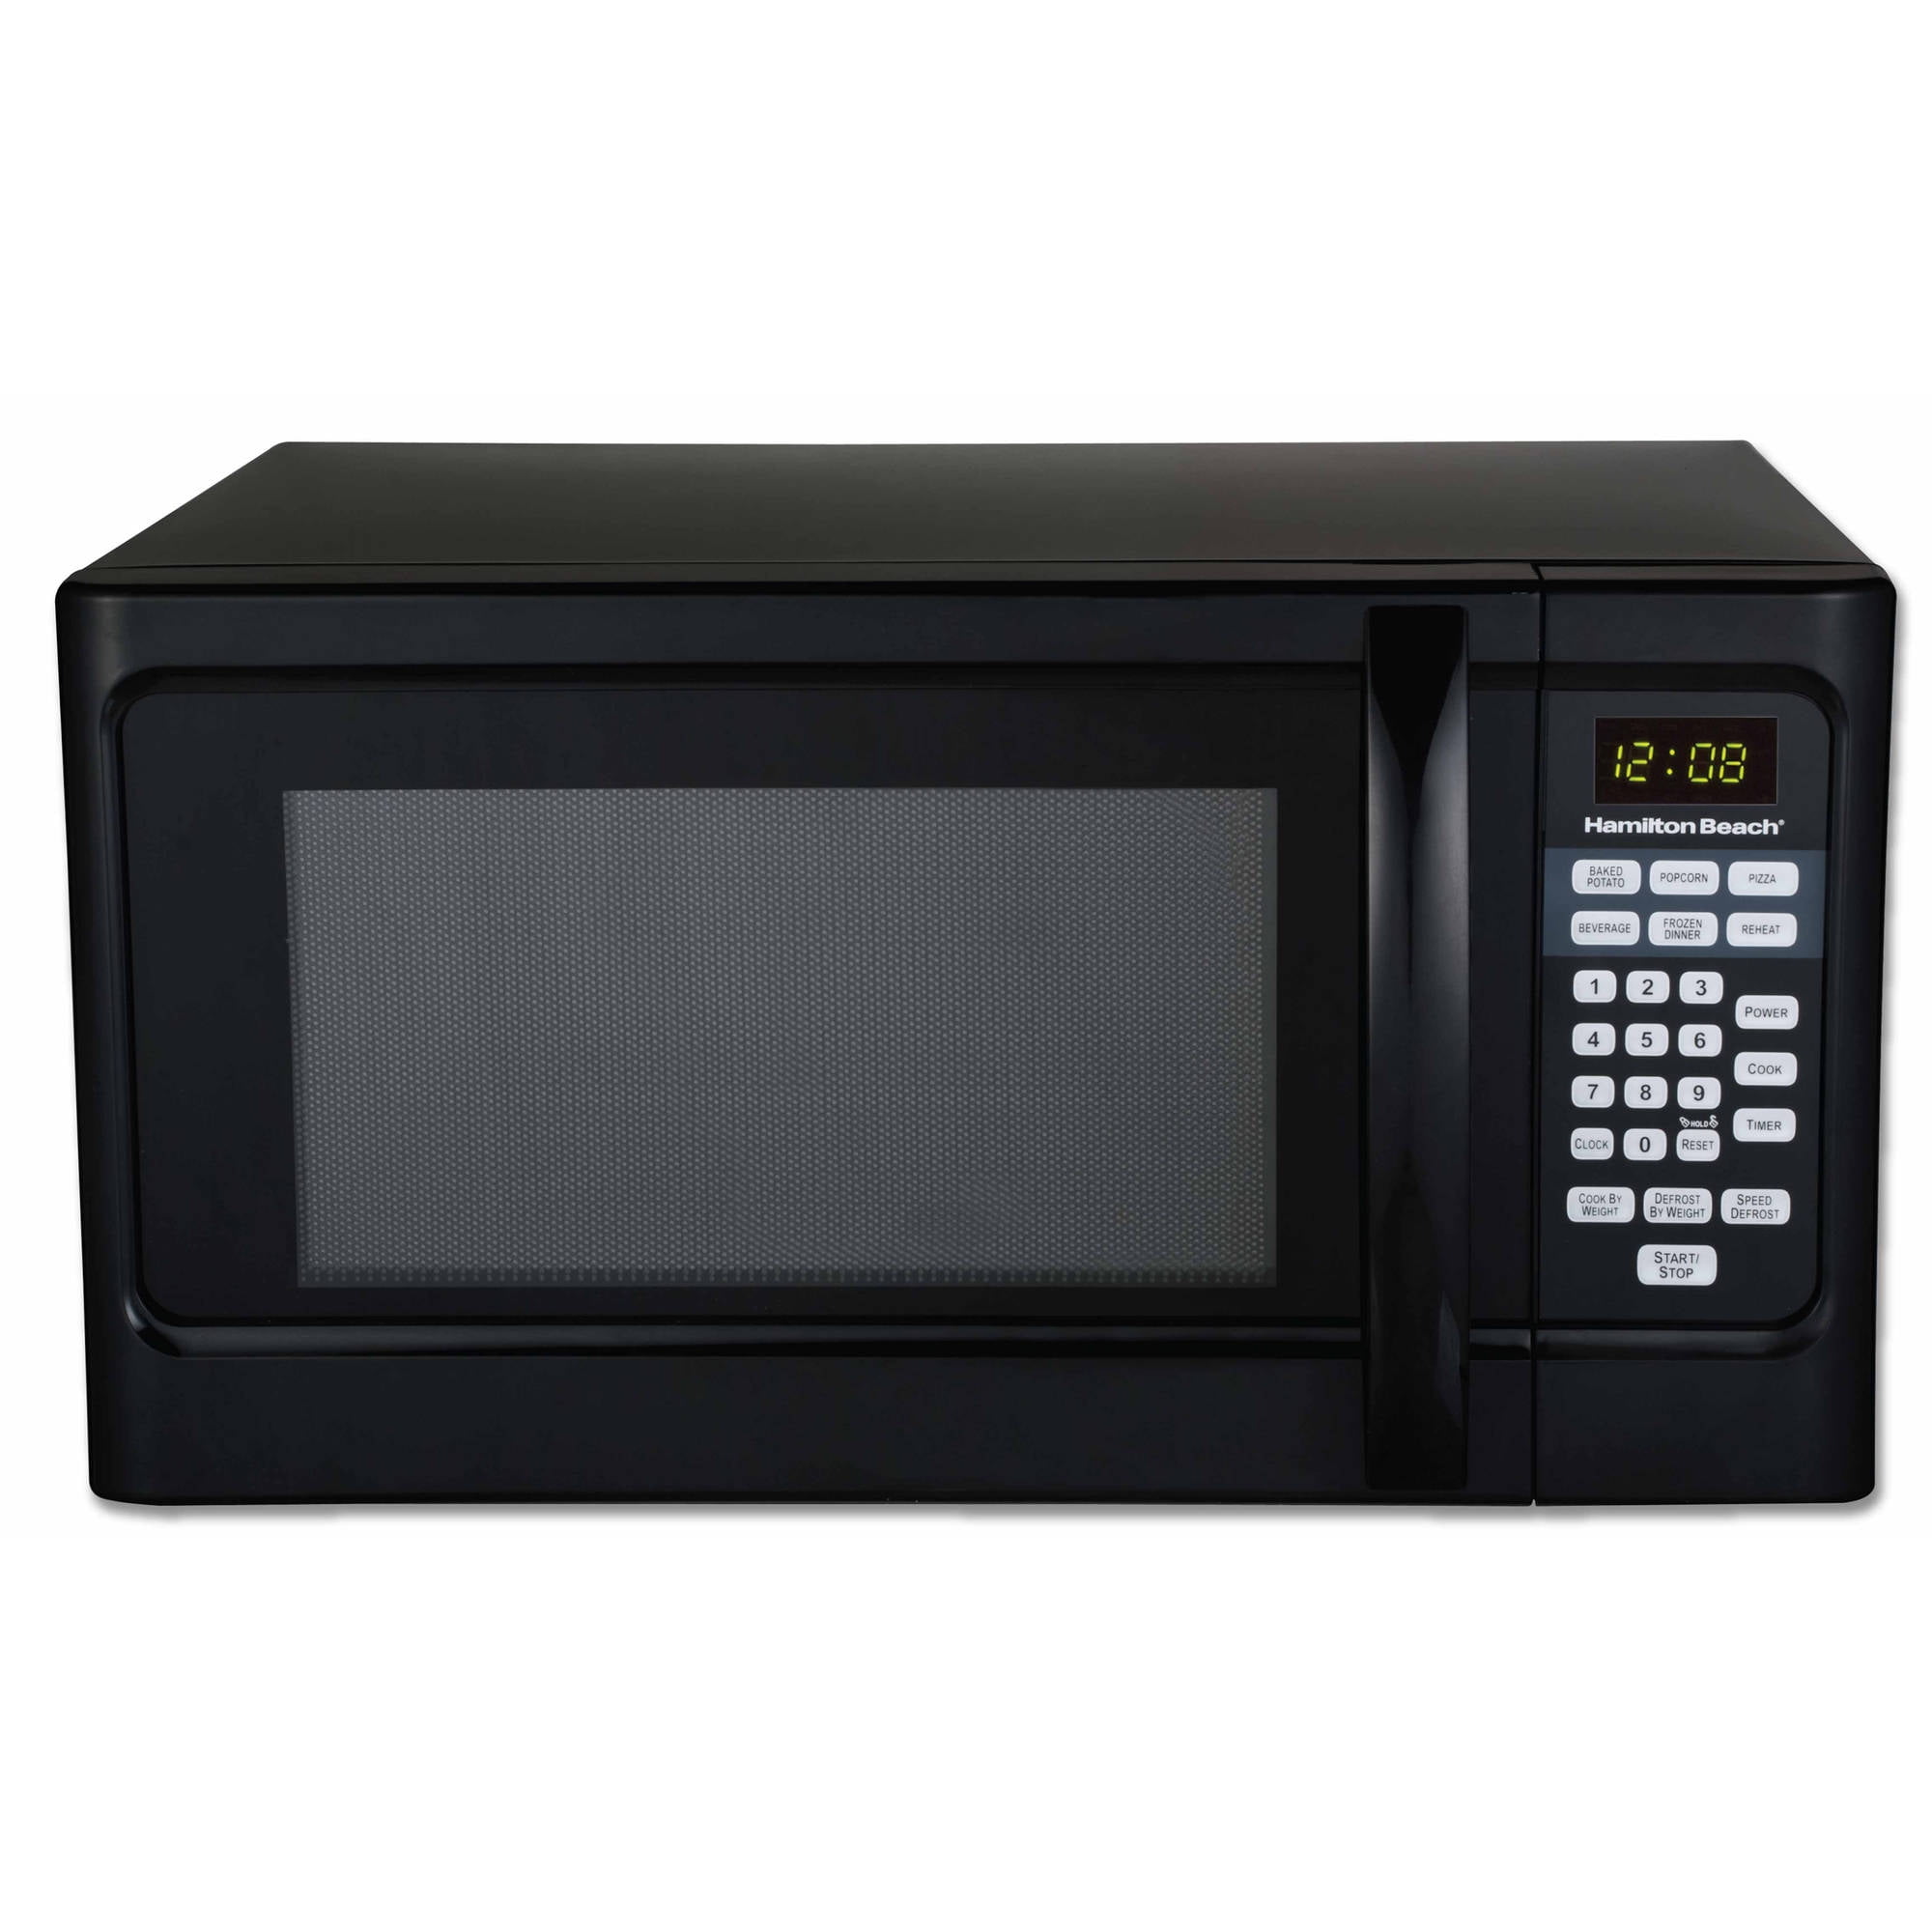 Hamilton Beach Microwave Oven How to use P100N30ALS3B 